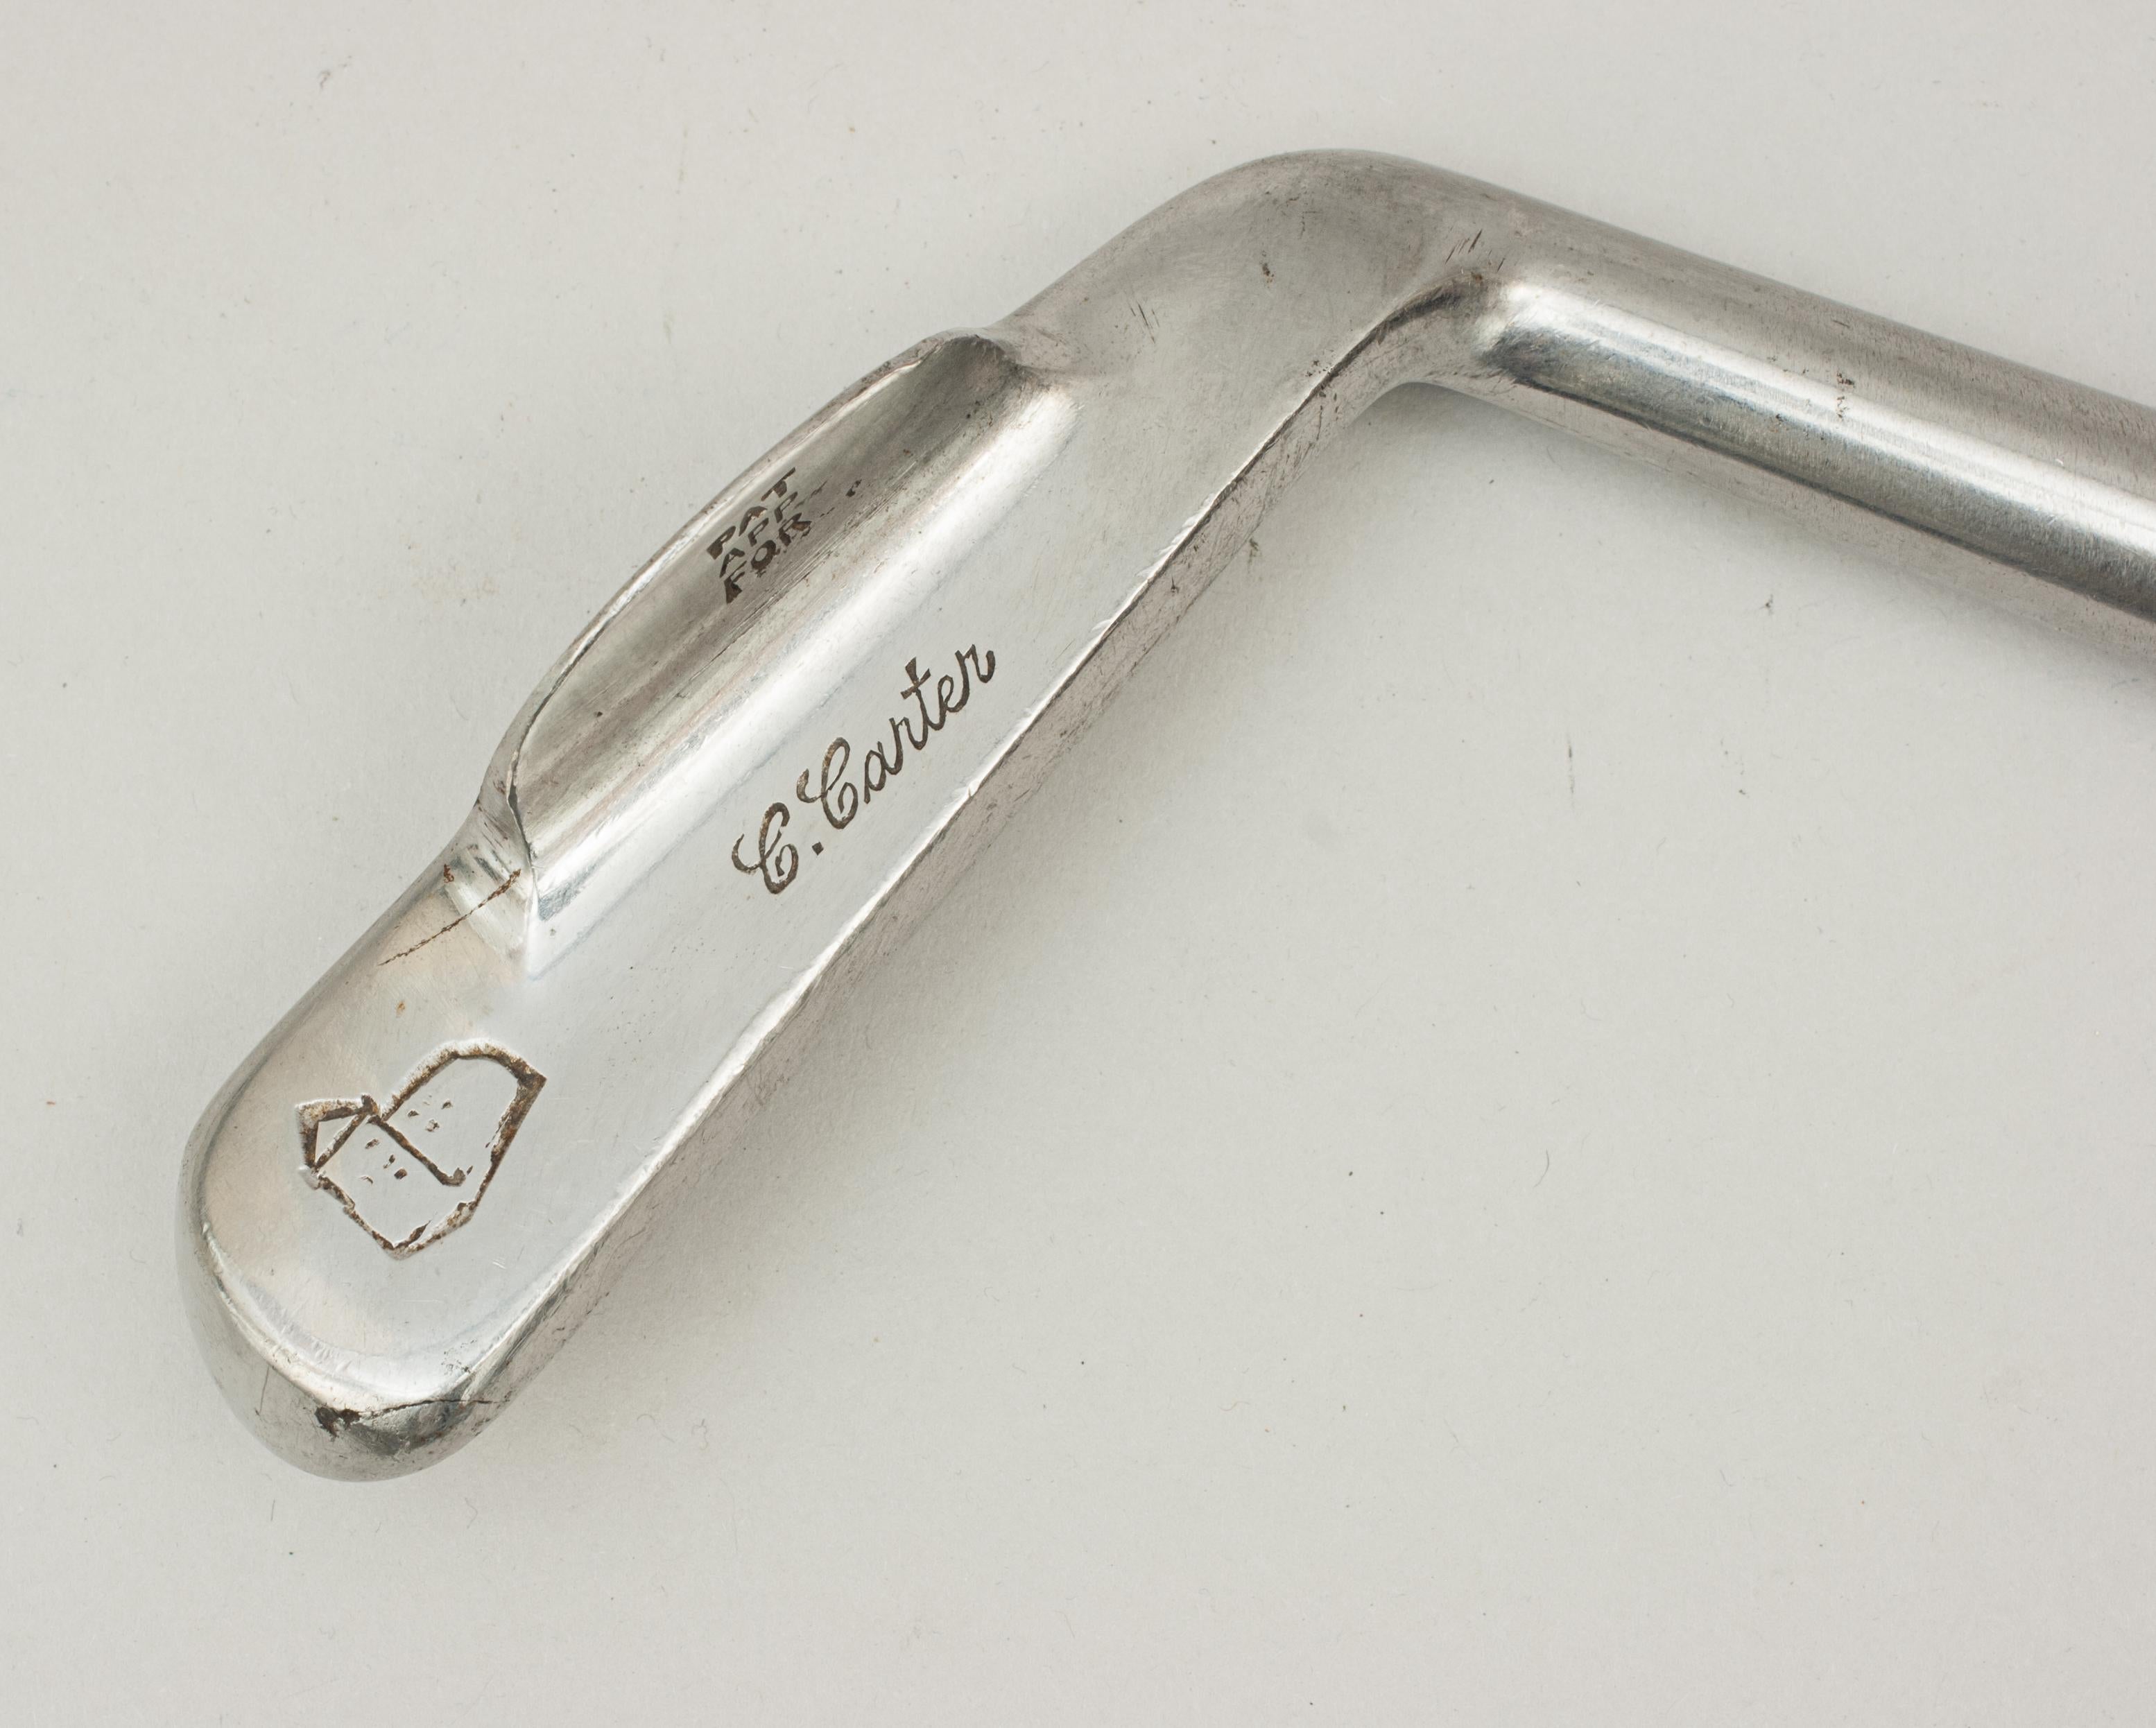 Mid-20th Century Lillywhite's 'Nonfooze' Steel Shafted Golf Club, Chipper